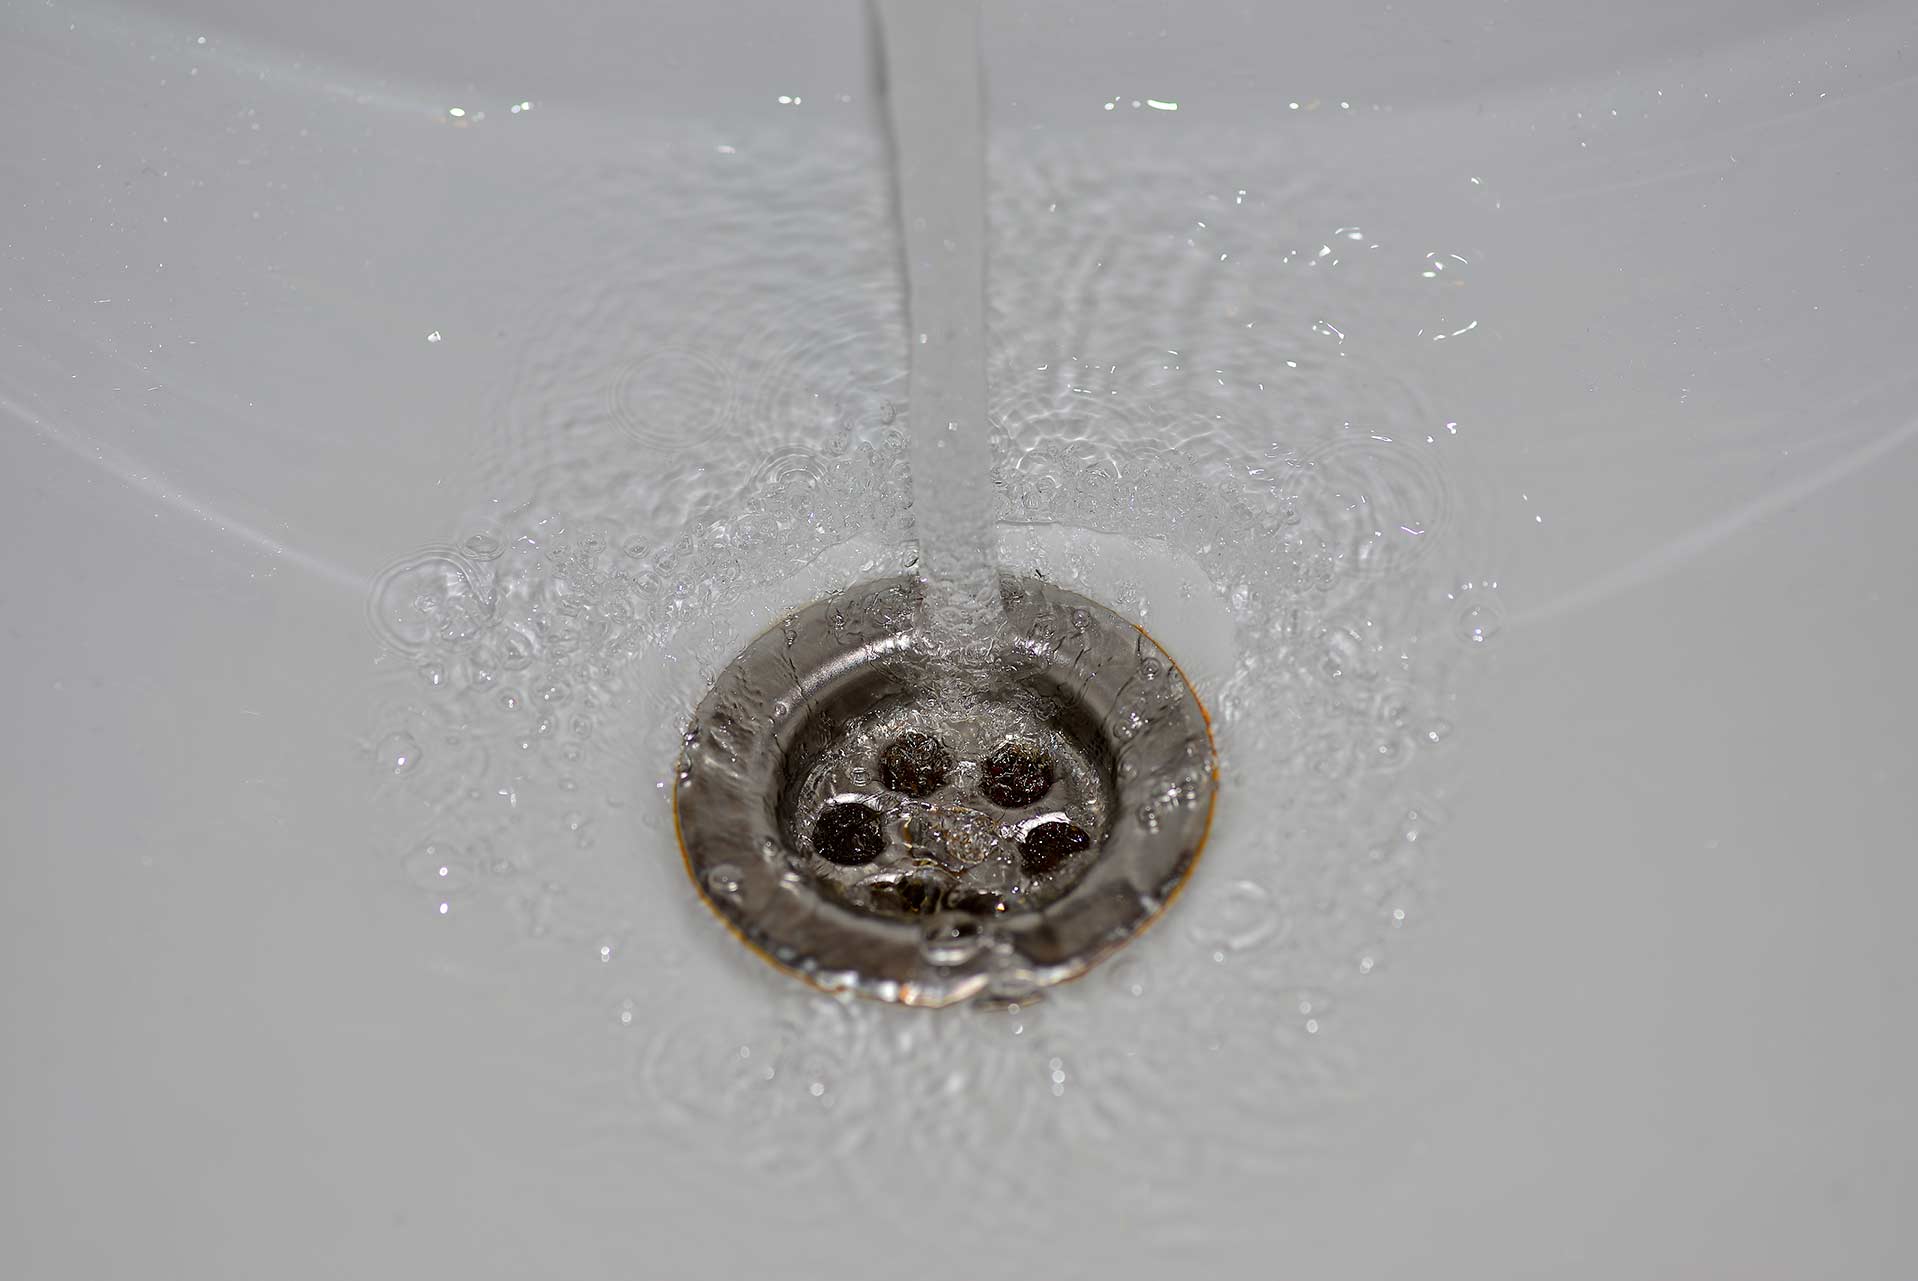 A2B Drains provides services to unblock blocked sinks and drains for properties in Nottingham.